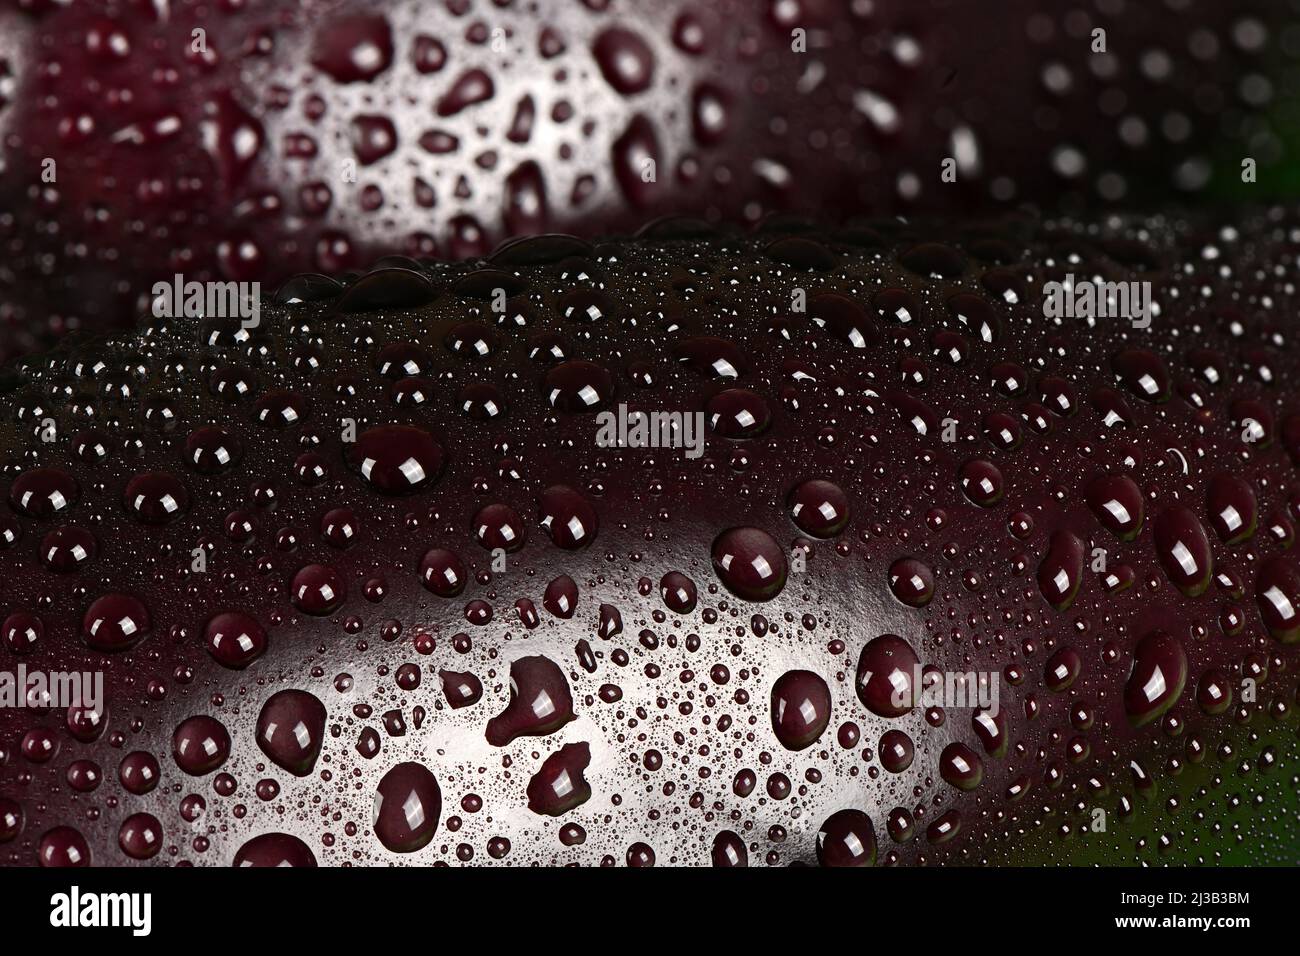 Abstract texture of water drop background. Droplet on black background. High resolution photo. Full depth of field. Stock Photo